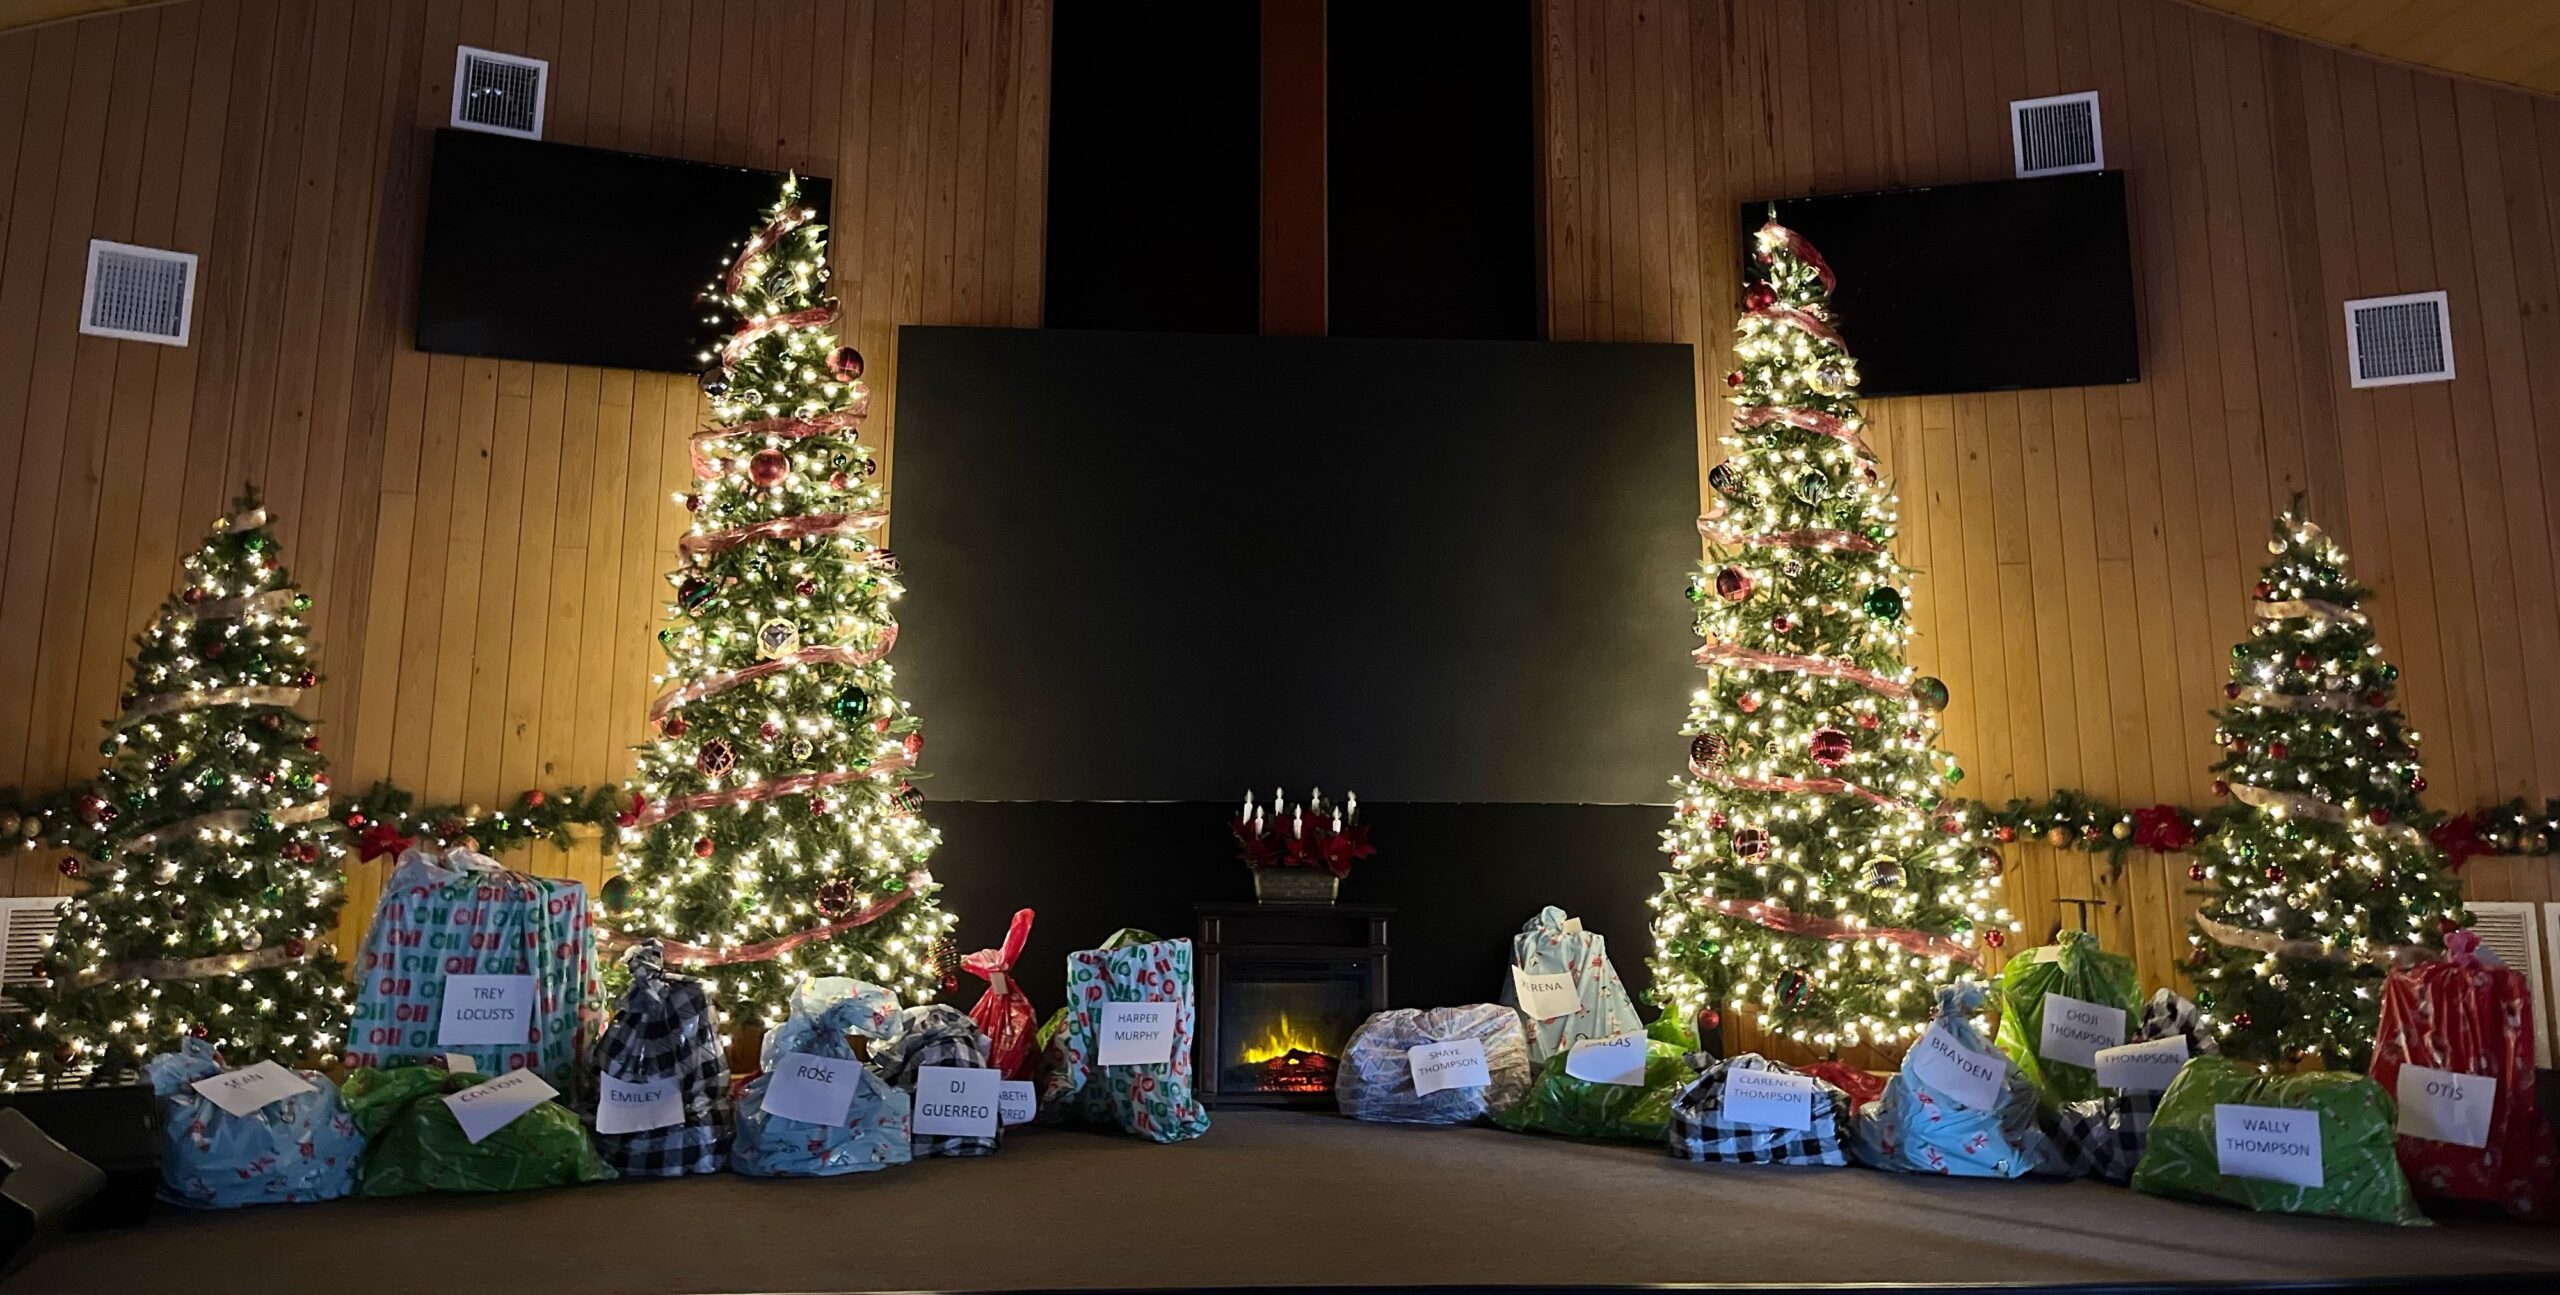 Large collection of Christmas gifts in church with holiday decorations.